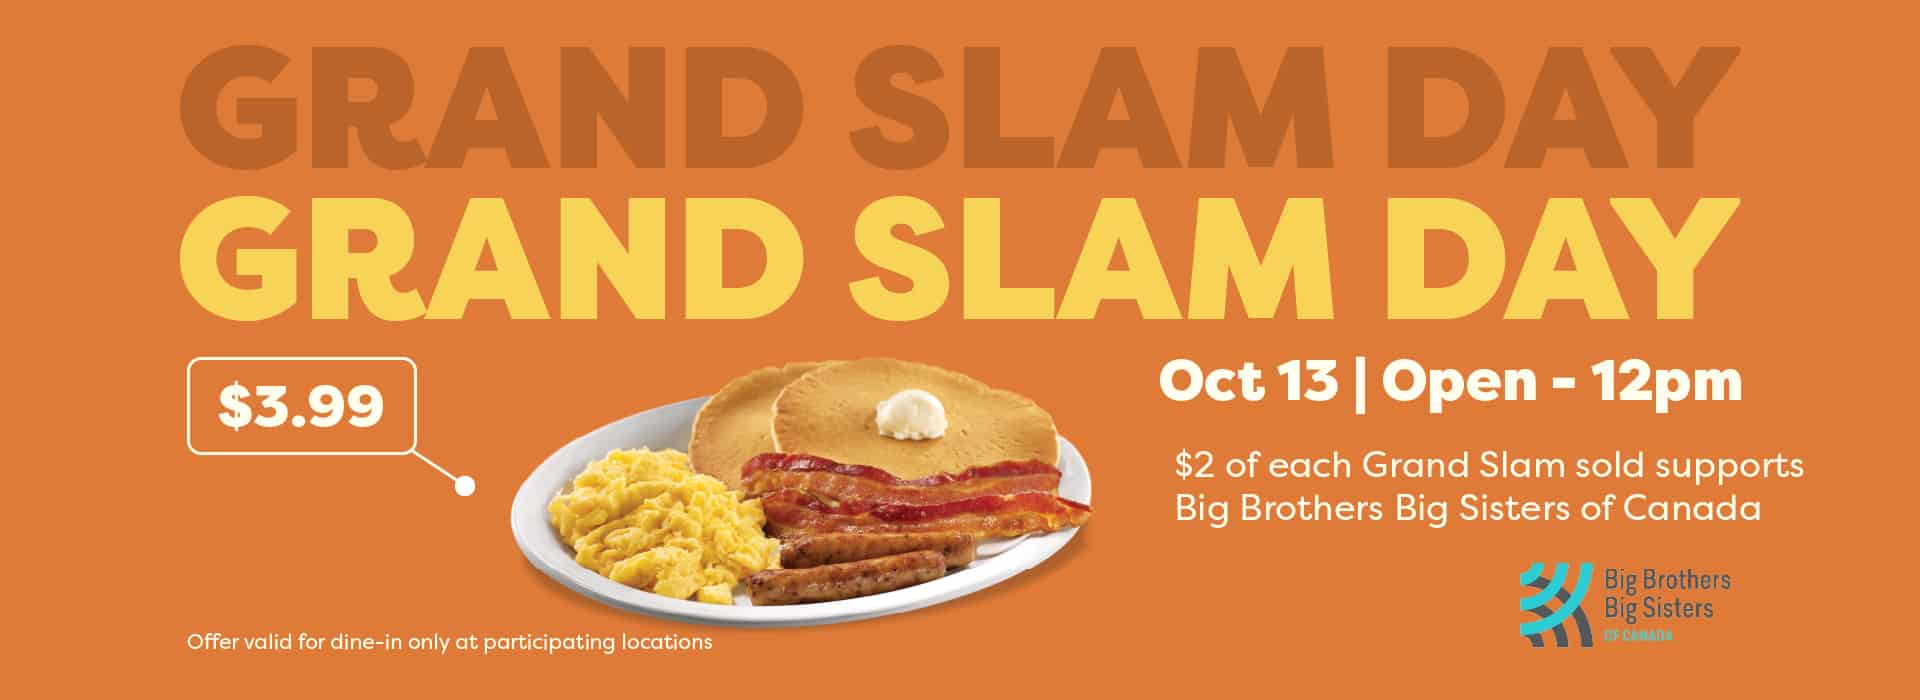 Big Brothers Big Sisters Grand Slam Day – Oct 13th